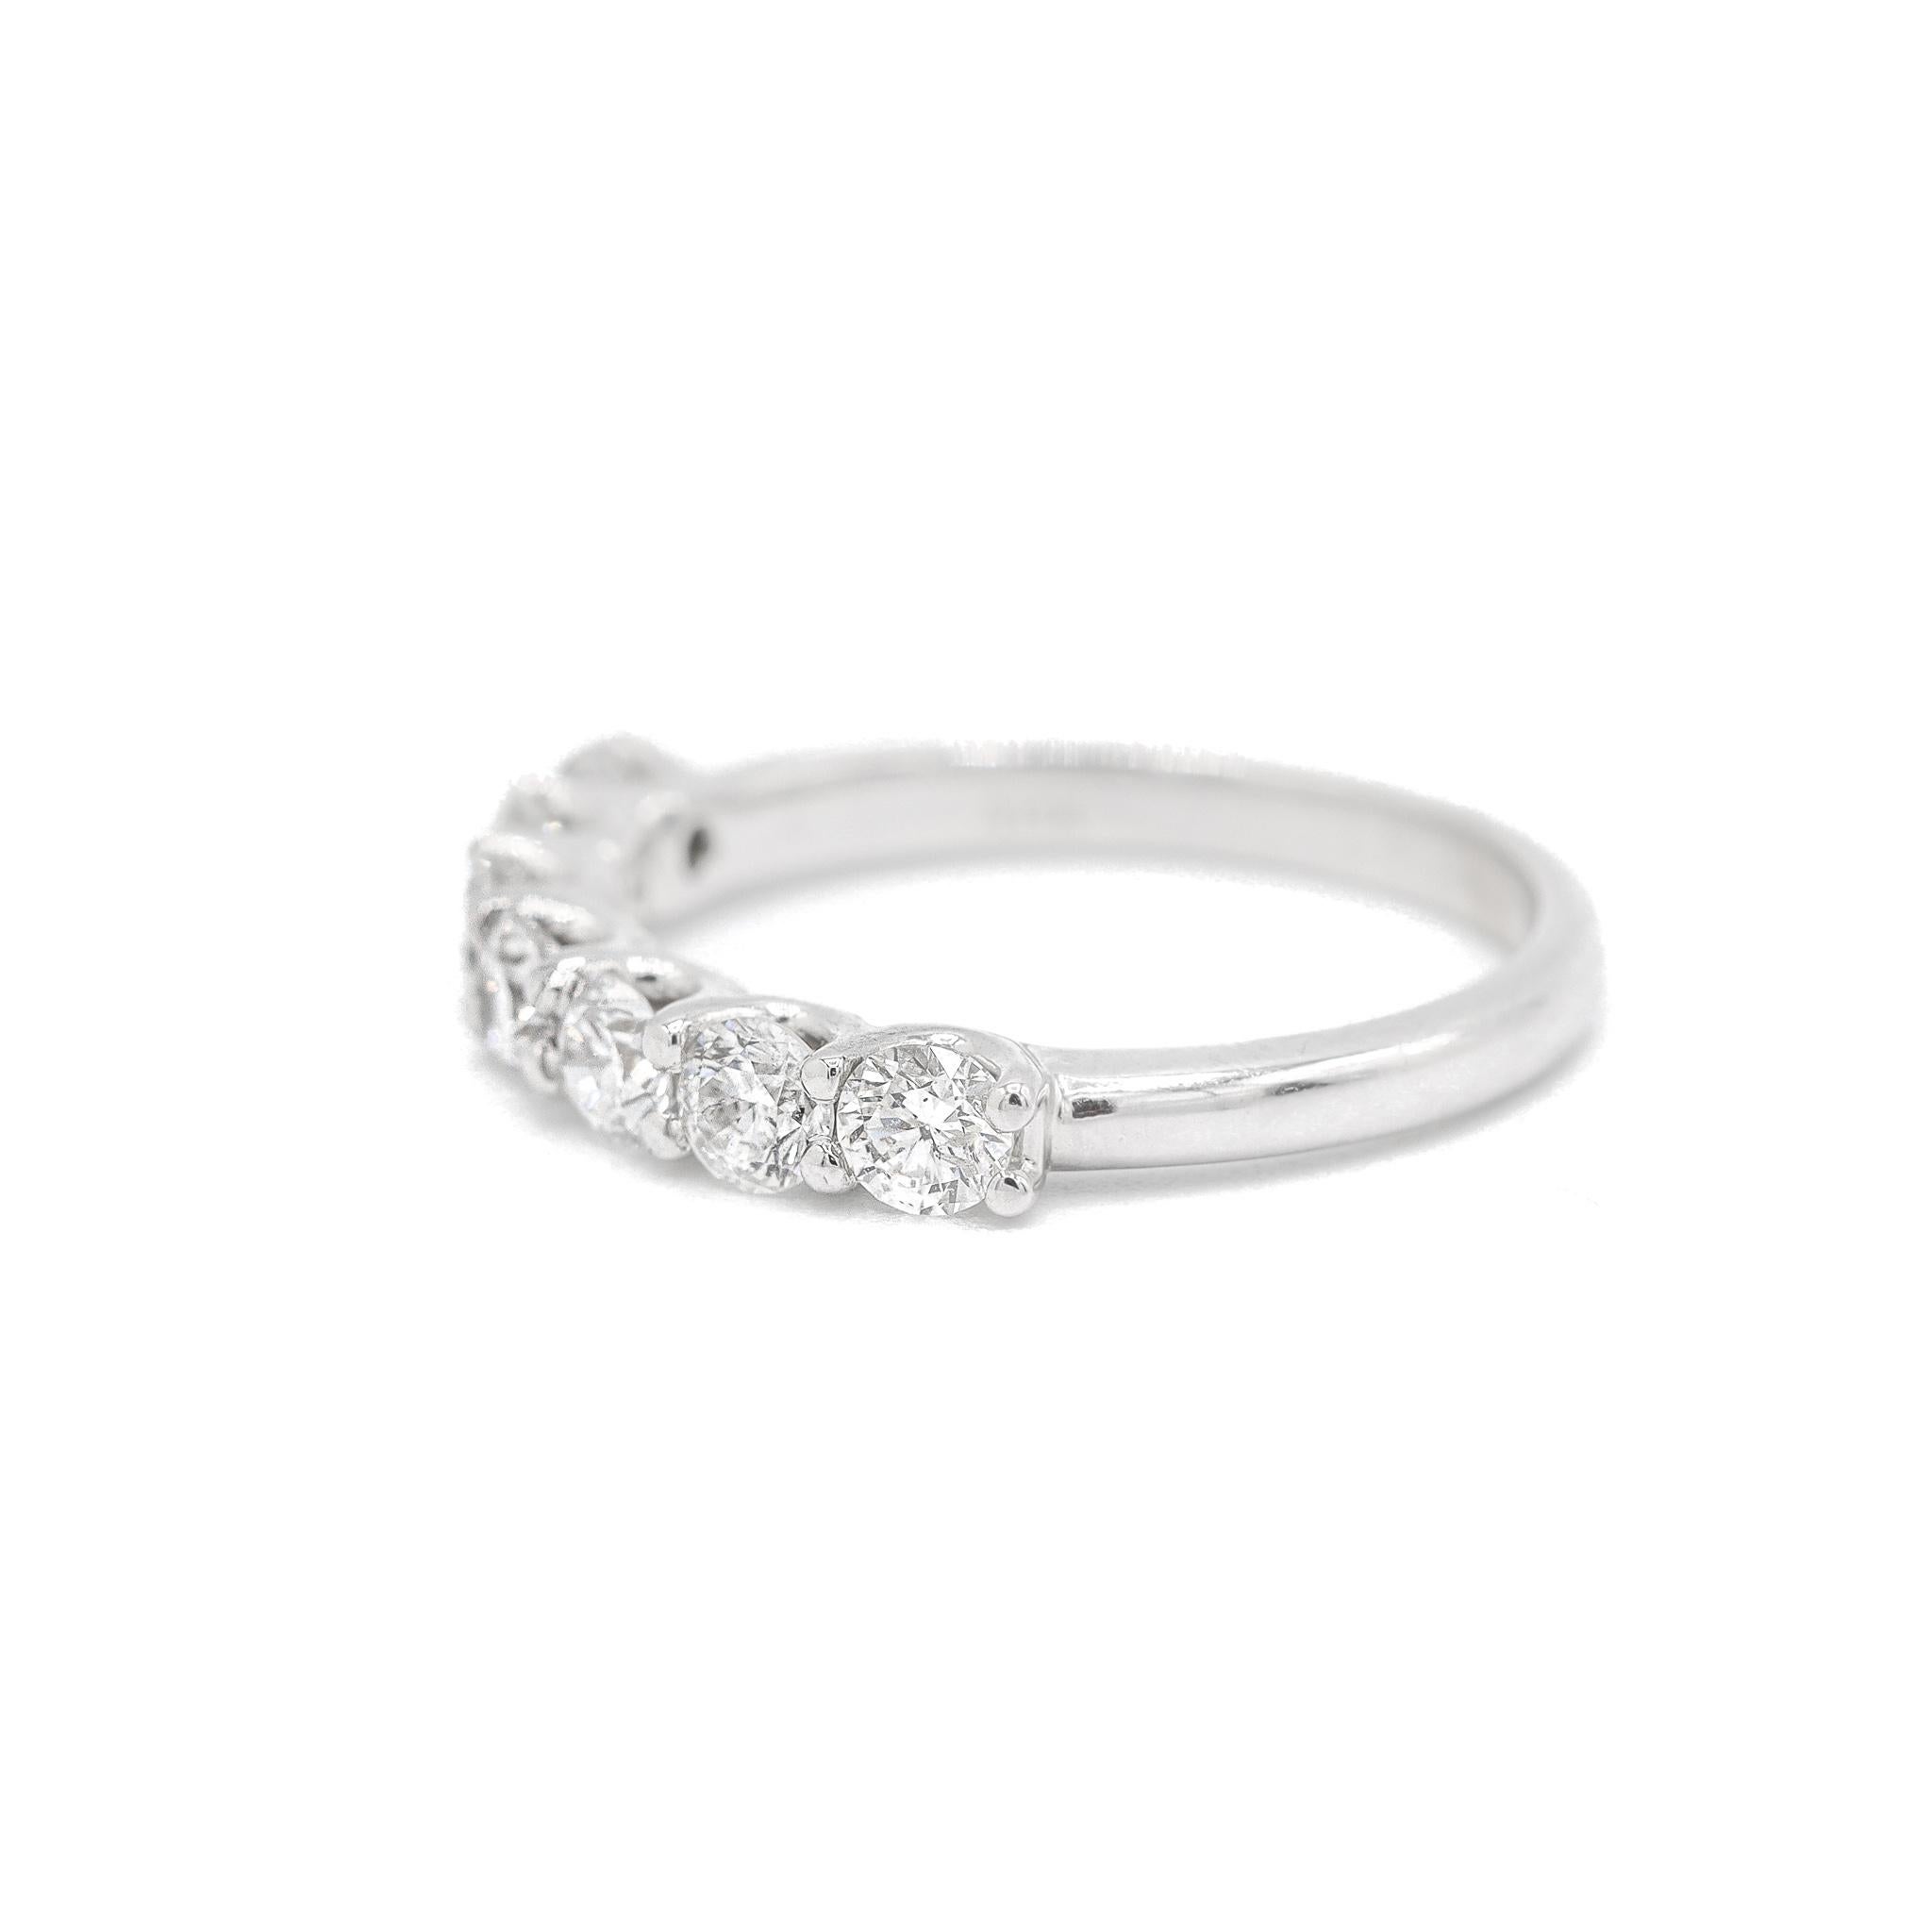 One ladies custom made polished 14K white gold seven-across, diamond half-eternity, wedding ring with a soft-square shank. The ring is a size 6.75, is 1.44mm thick and measures approximately 2.15mm in width and weighs a total of 2.70 grams. Engraved